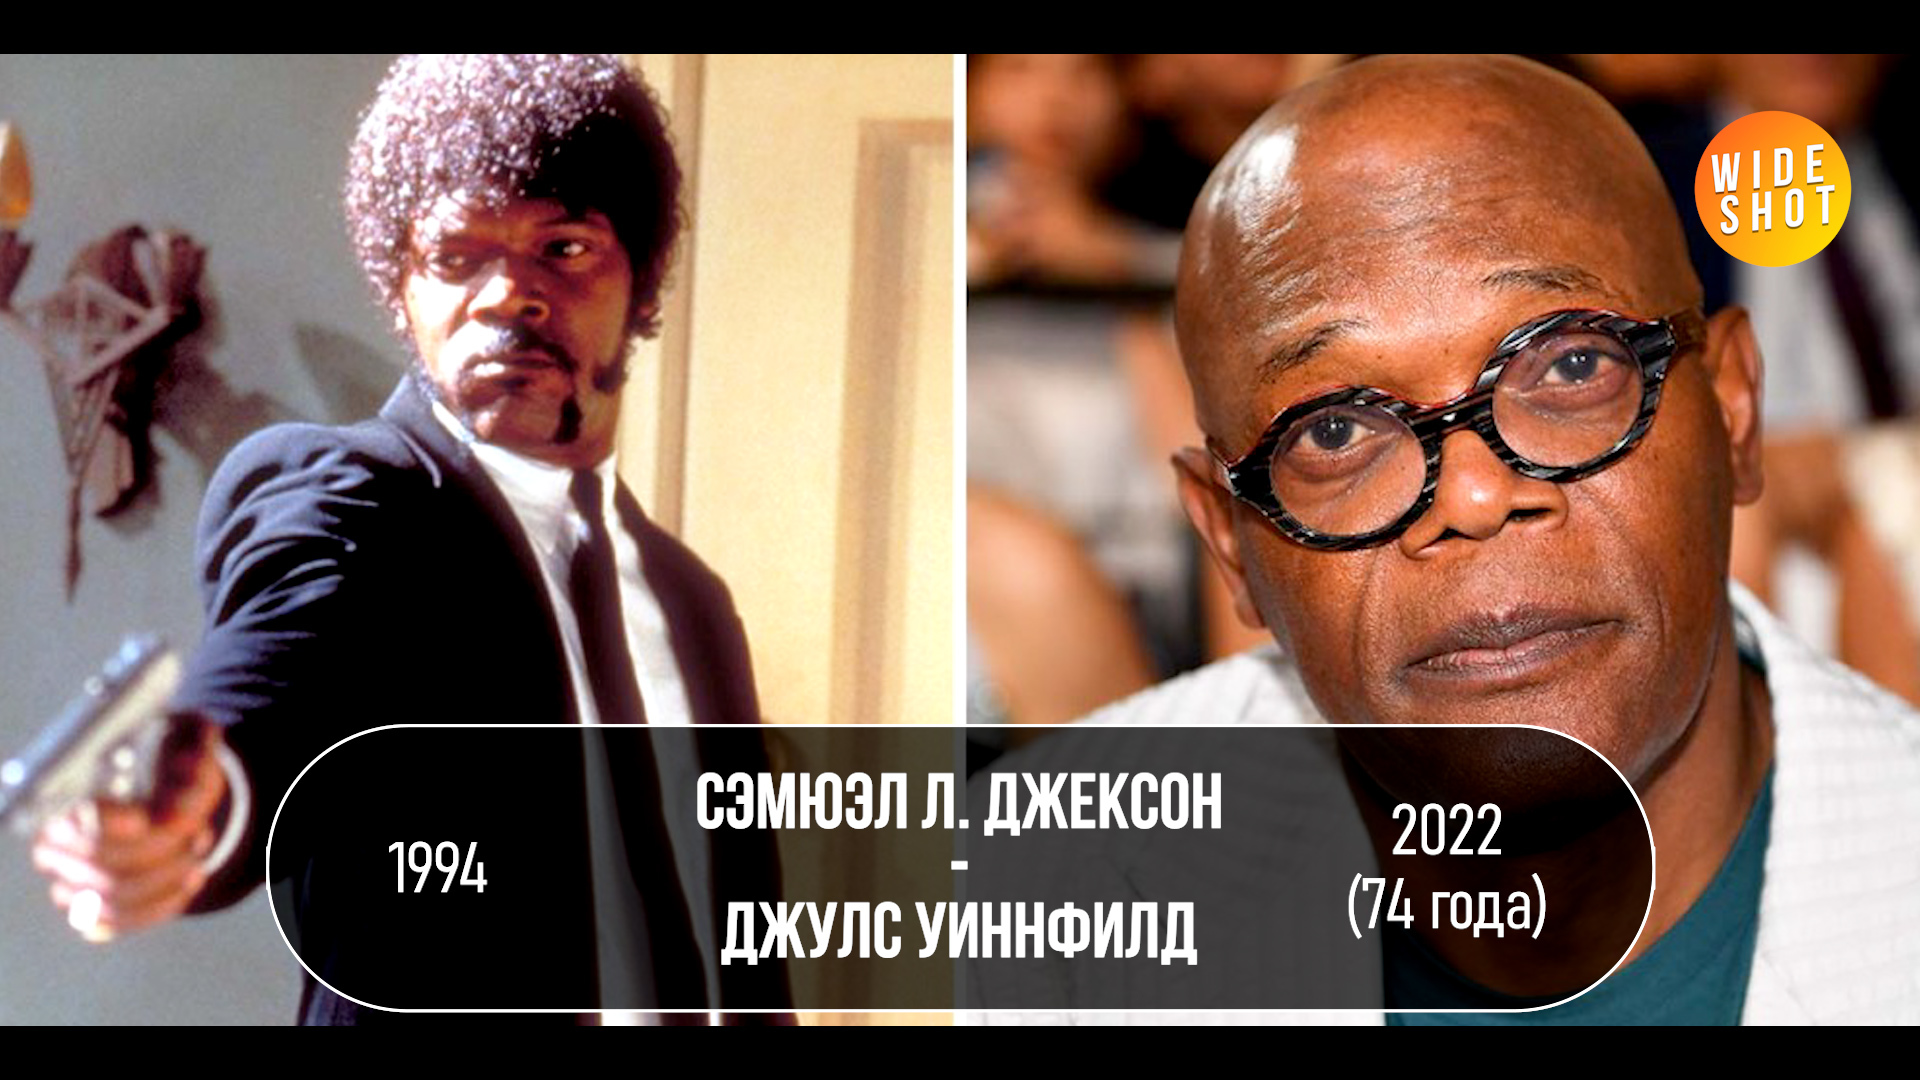 PULP FICTION: ACTORS THEN AND NOW (28 YEARS LATER!) - Movies, Actors and actresses, What to see, Quentin Tarantino, Celebrities, Hollywood, Pulp Fiction, Movie heroes, Films of the 90s, Video review, Video, Longpost